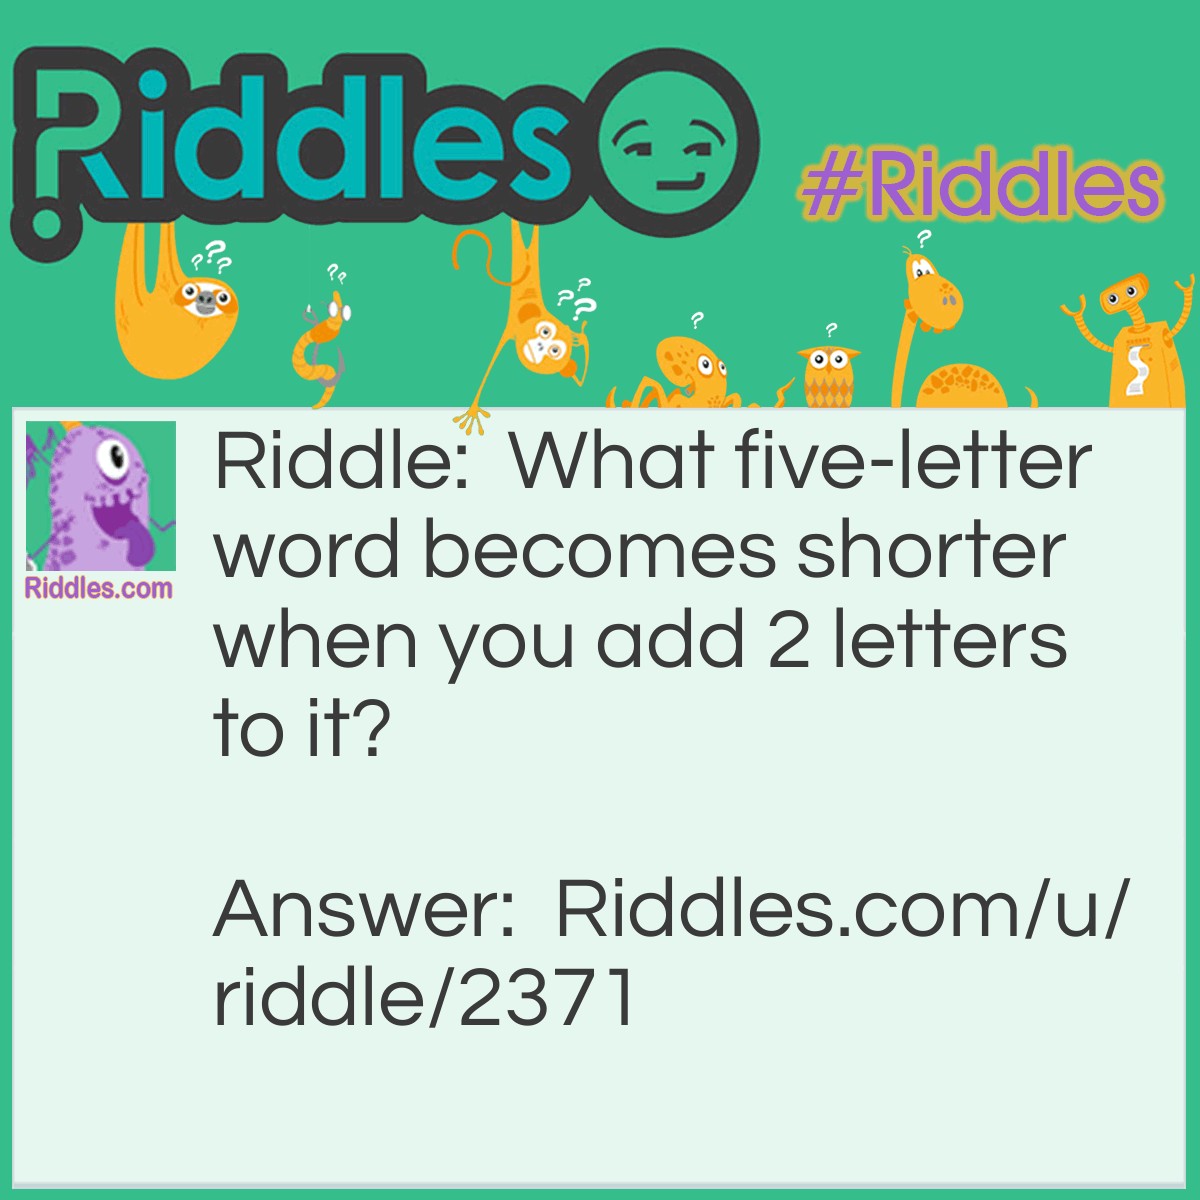 Riddle: What five-letter word becomes shorter when you add 2 letters to it? Answer: Short